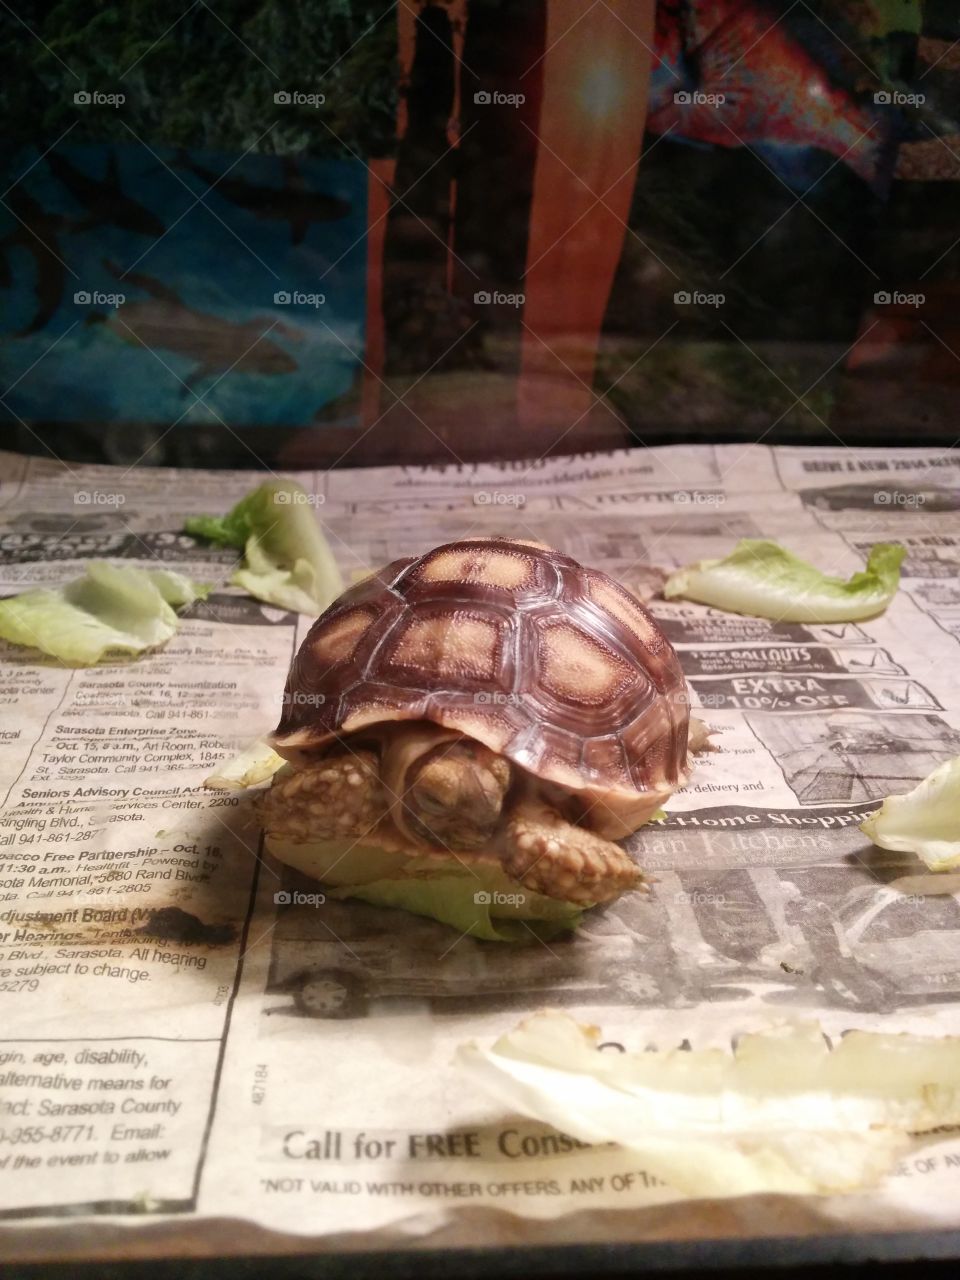 A few-week old sulcata tortoise sleeps in an enclosure, newspaper below him and bits of romaine lettuce in the background. His legs are up, eyes closed, head to the side. He's fallen asleep on his meal.